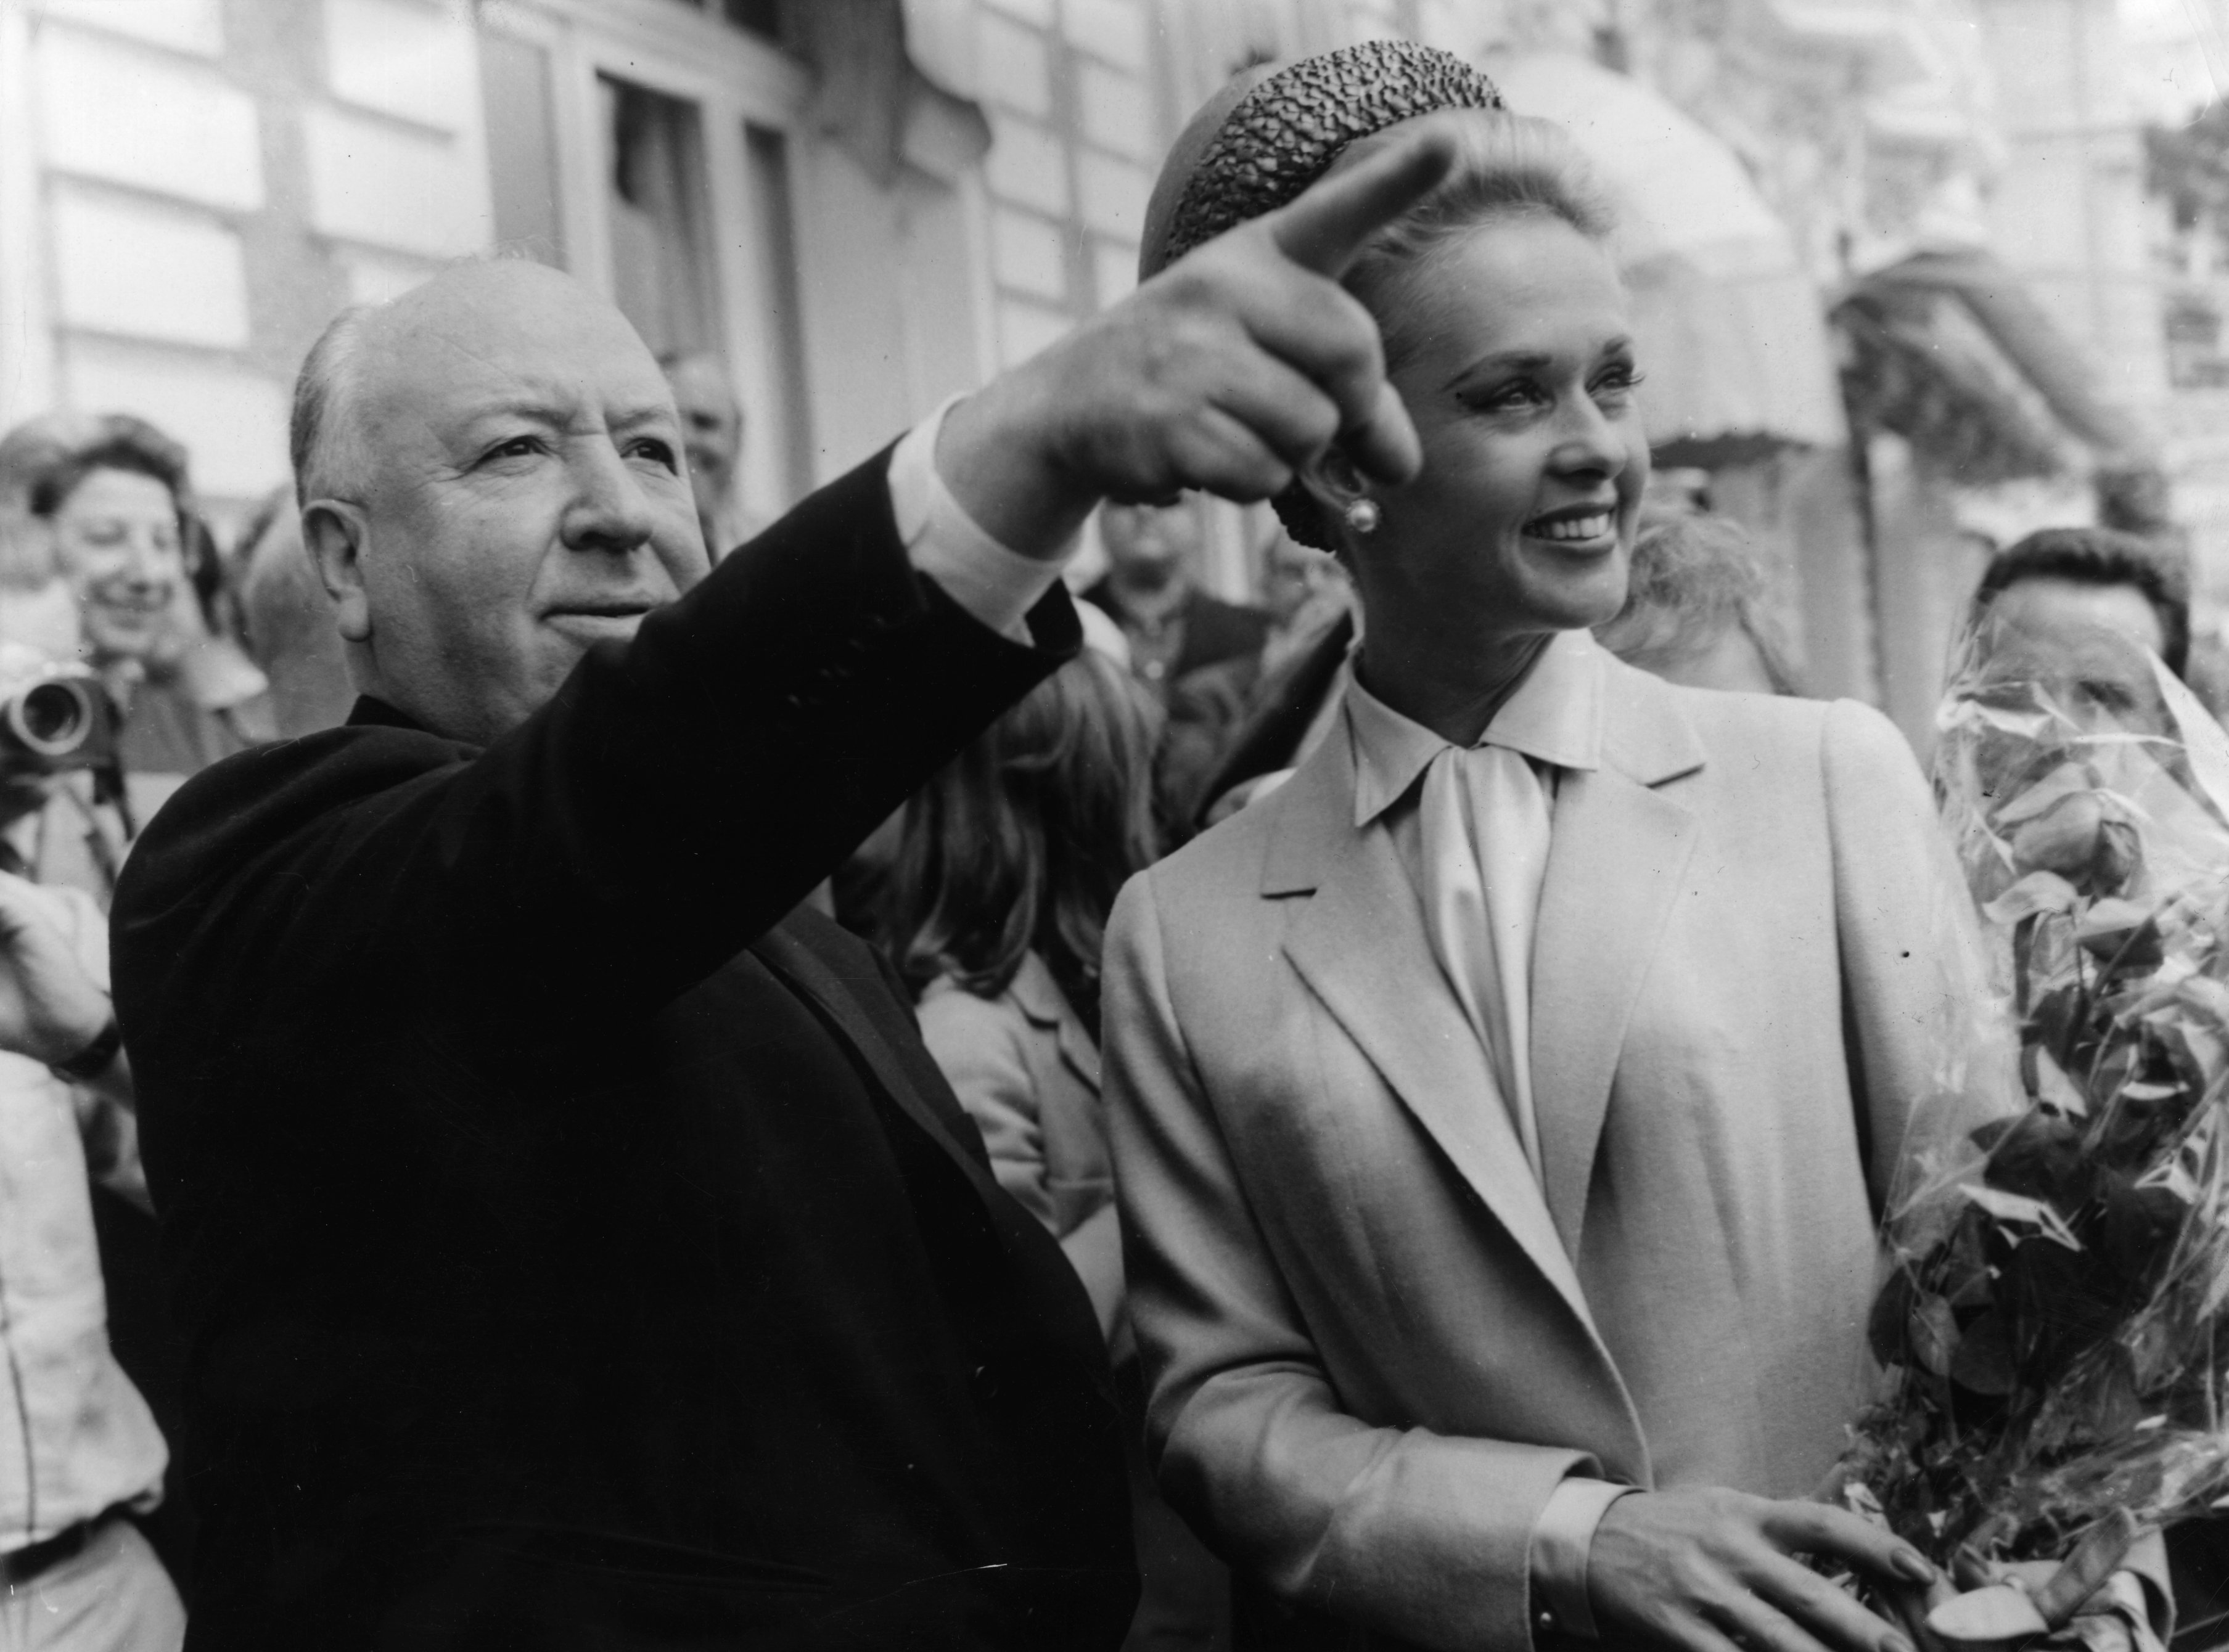 Alfred Hitchcock and American actress Tippi Hedren explore Cannes together after the premiere of his latest thriller 'The Birds' in which she plays the title role. | Source: Getty Images